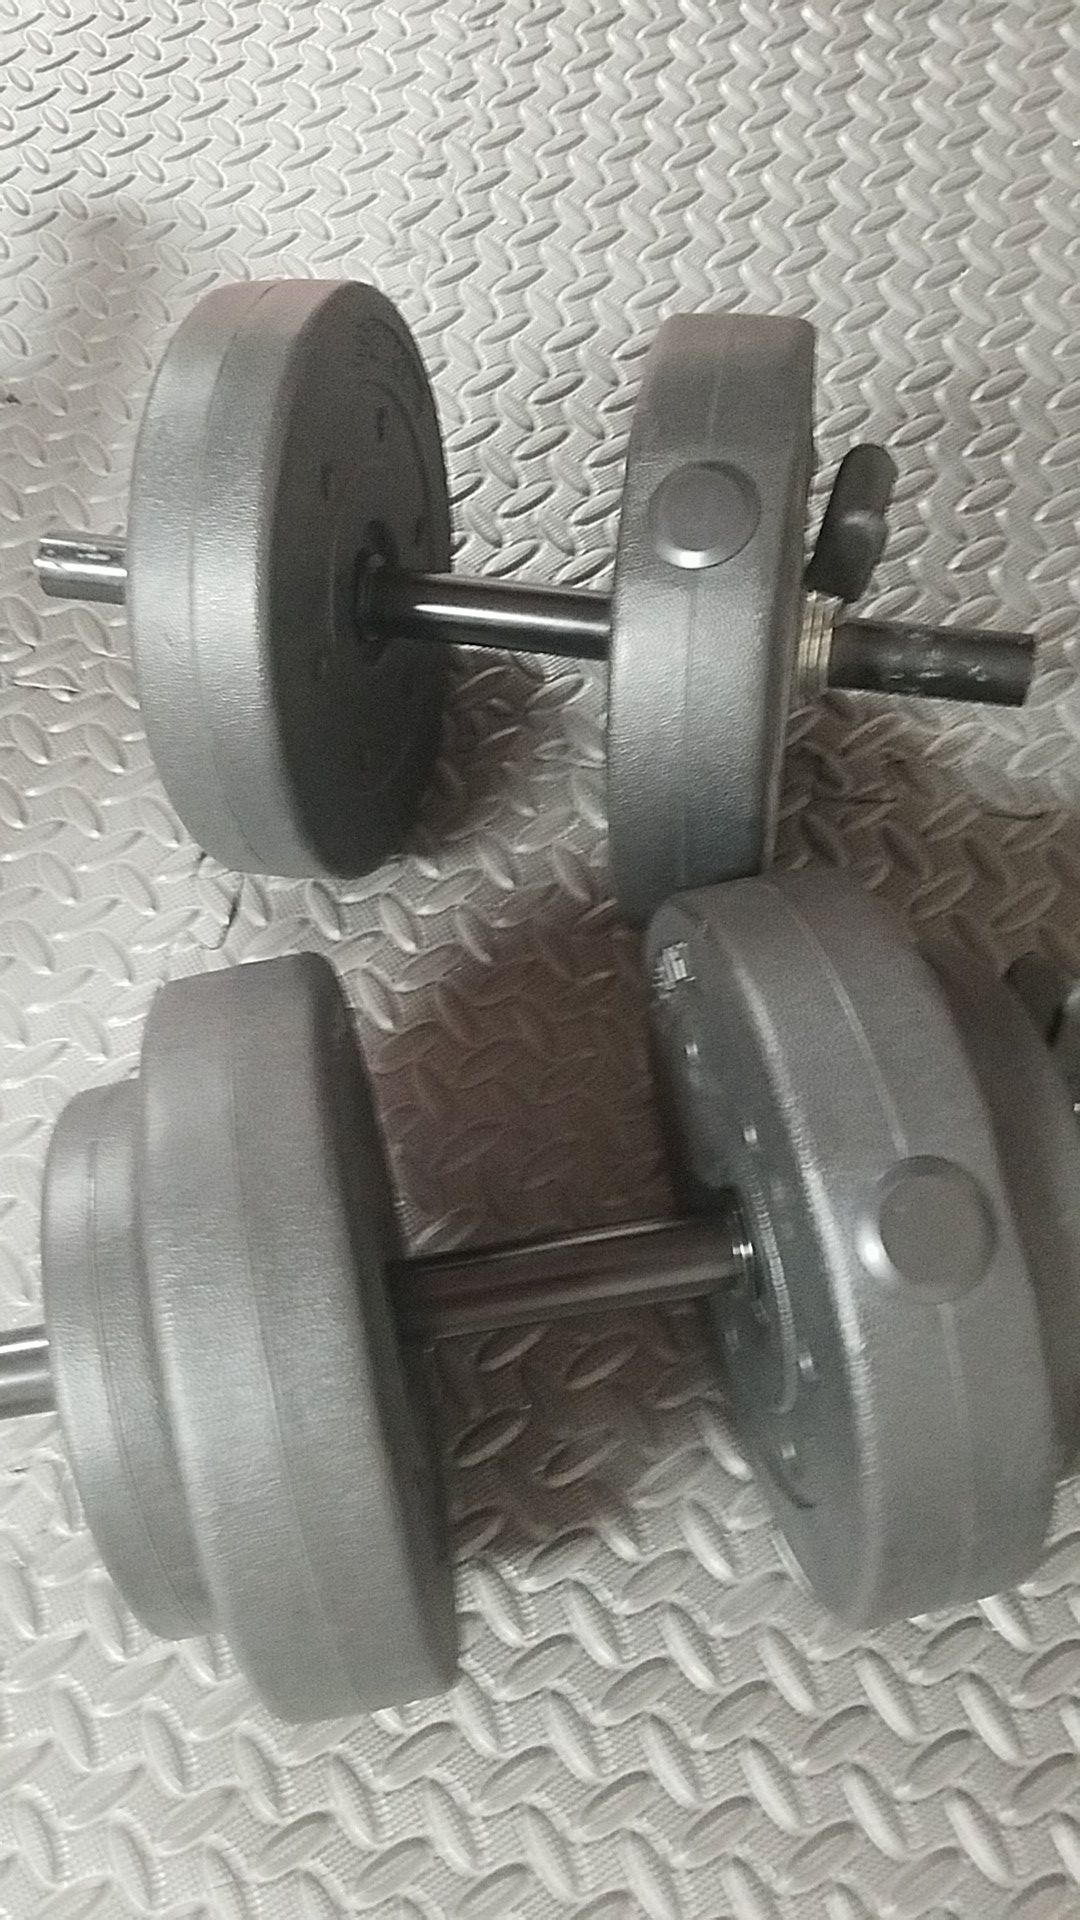 Whole dumbbell set fitness ball and ab wheels